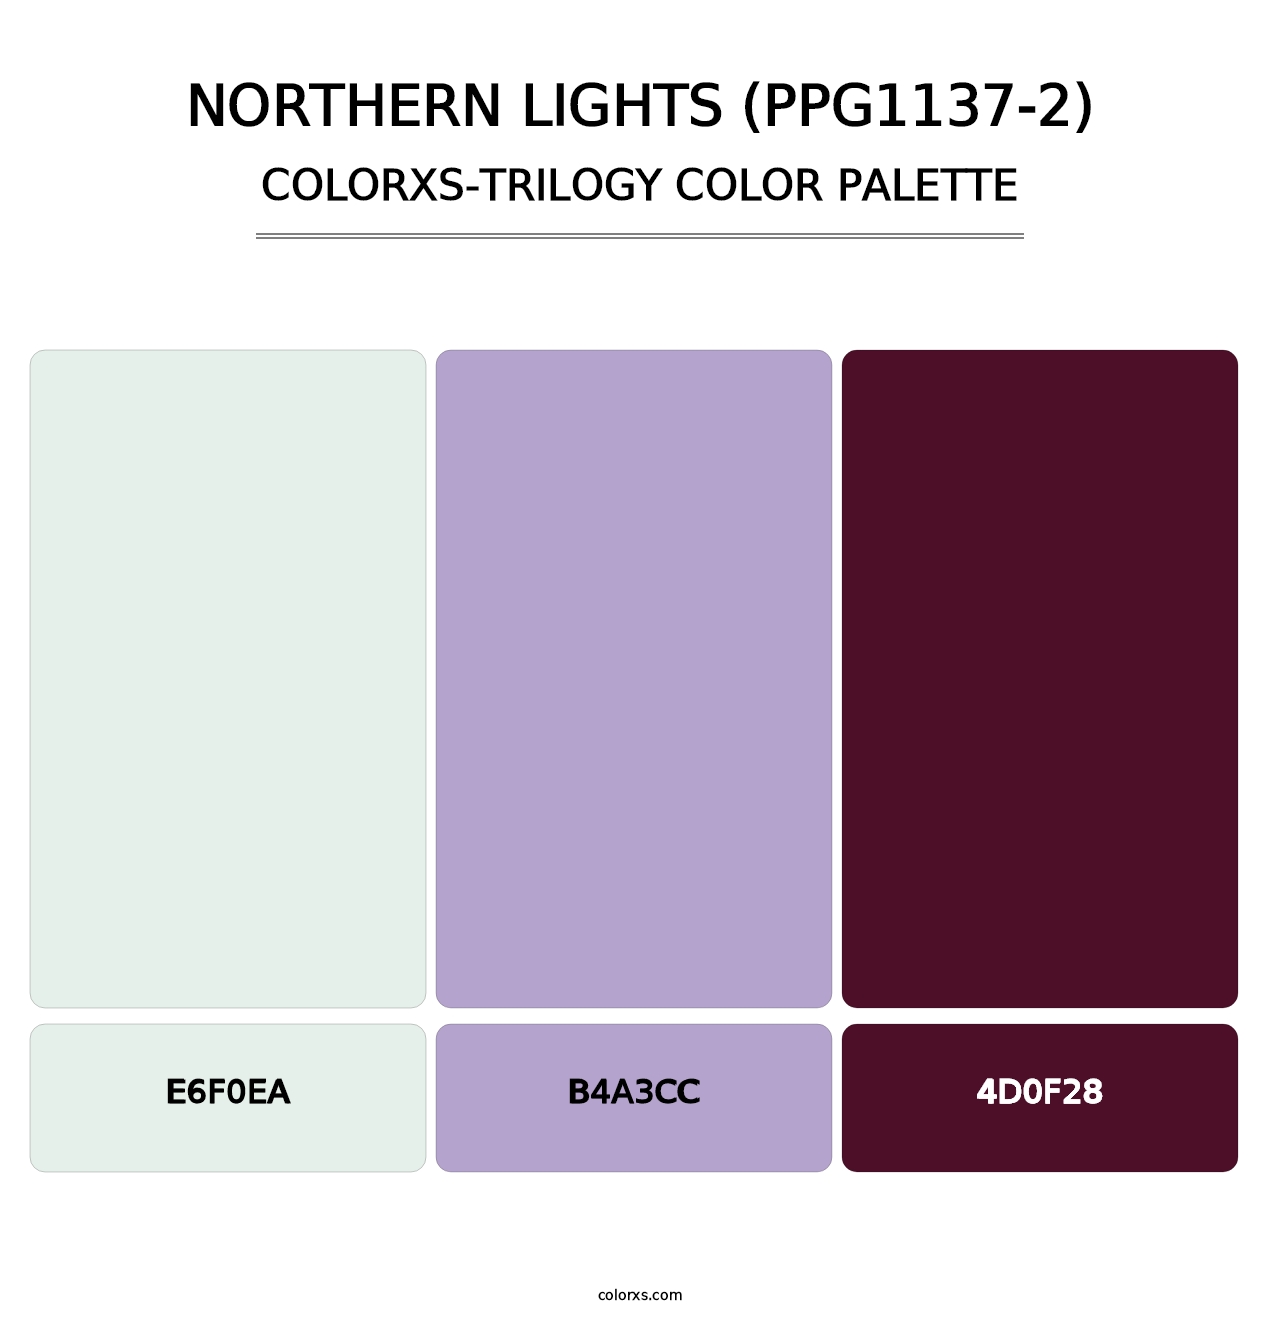 Northern Lights (PPG1137-2) - Colorxs Trilogy Palette